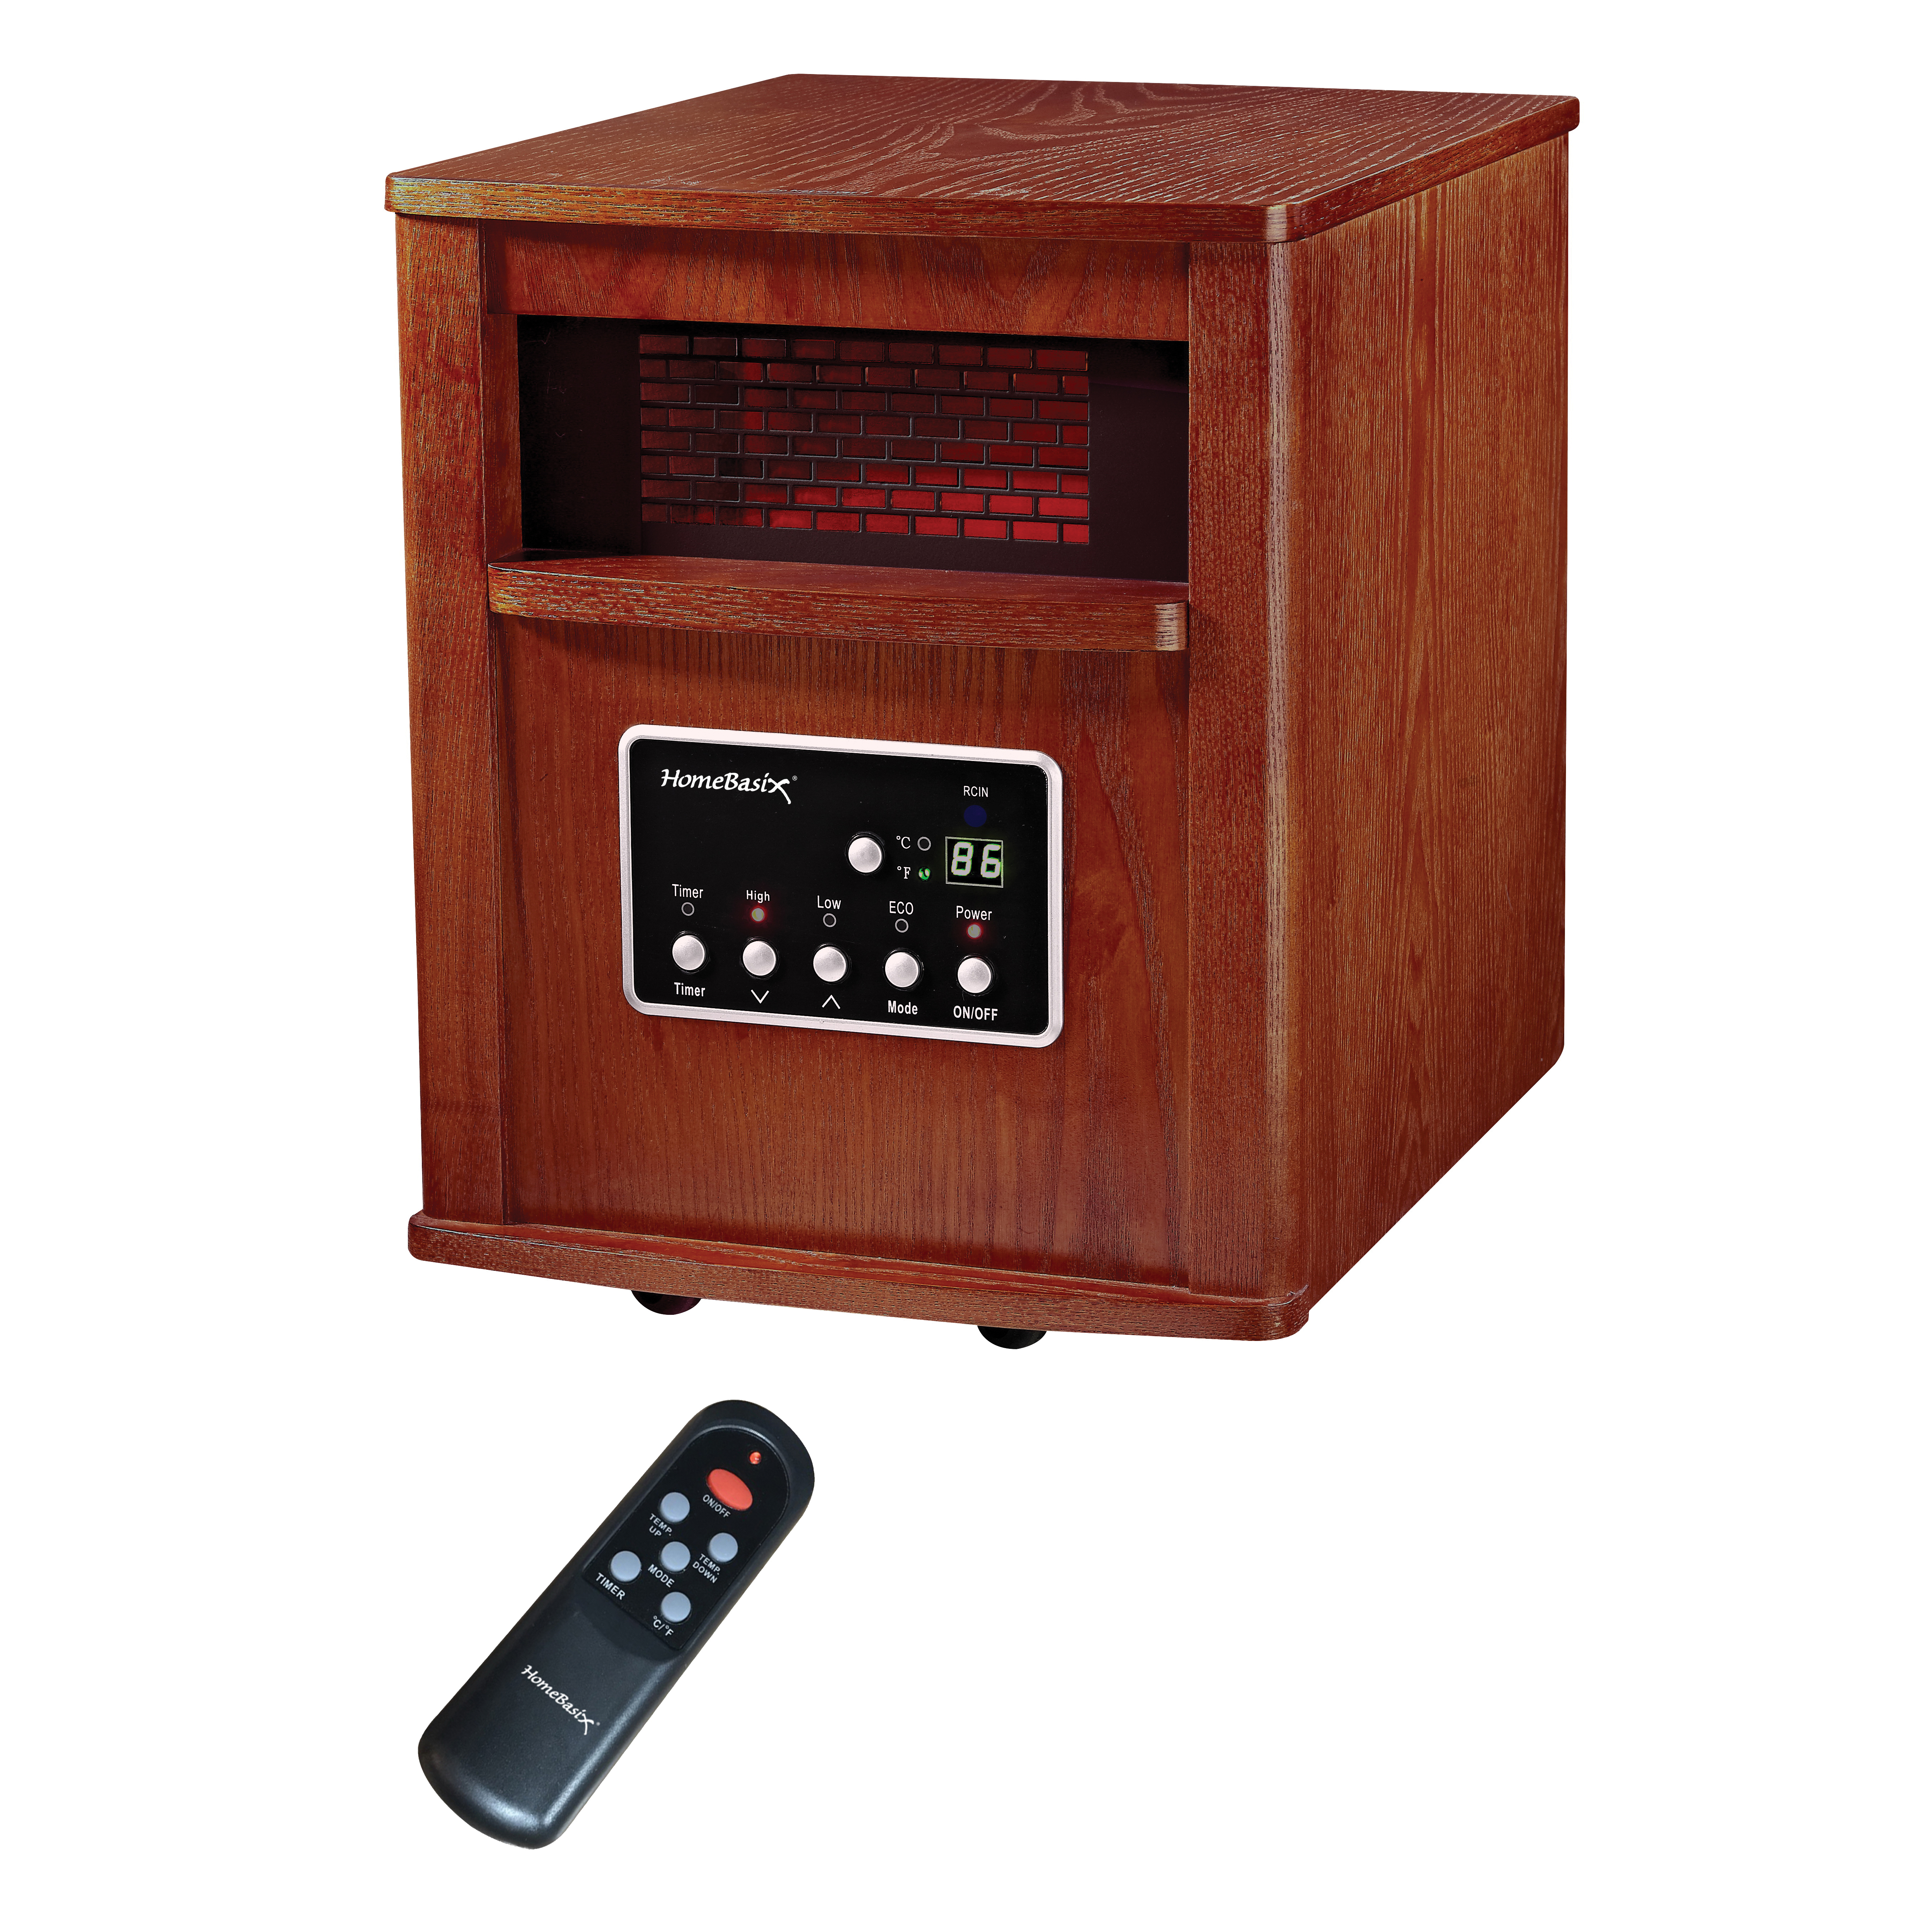 Infrared Quartz Wood Cabinet Heater with Remote Control, 12.5 A, 120 V, ECO/1000/1500 W, Cherry